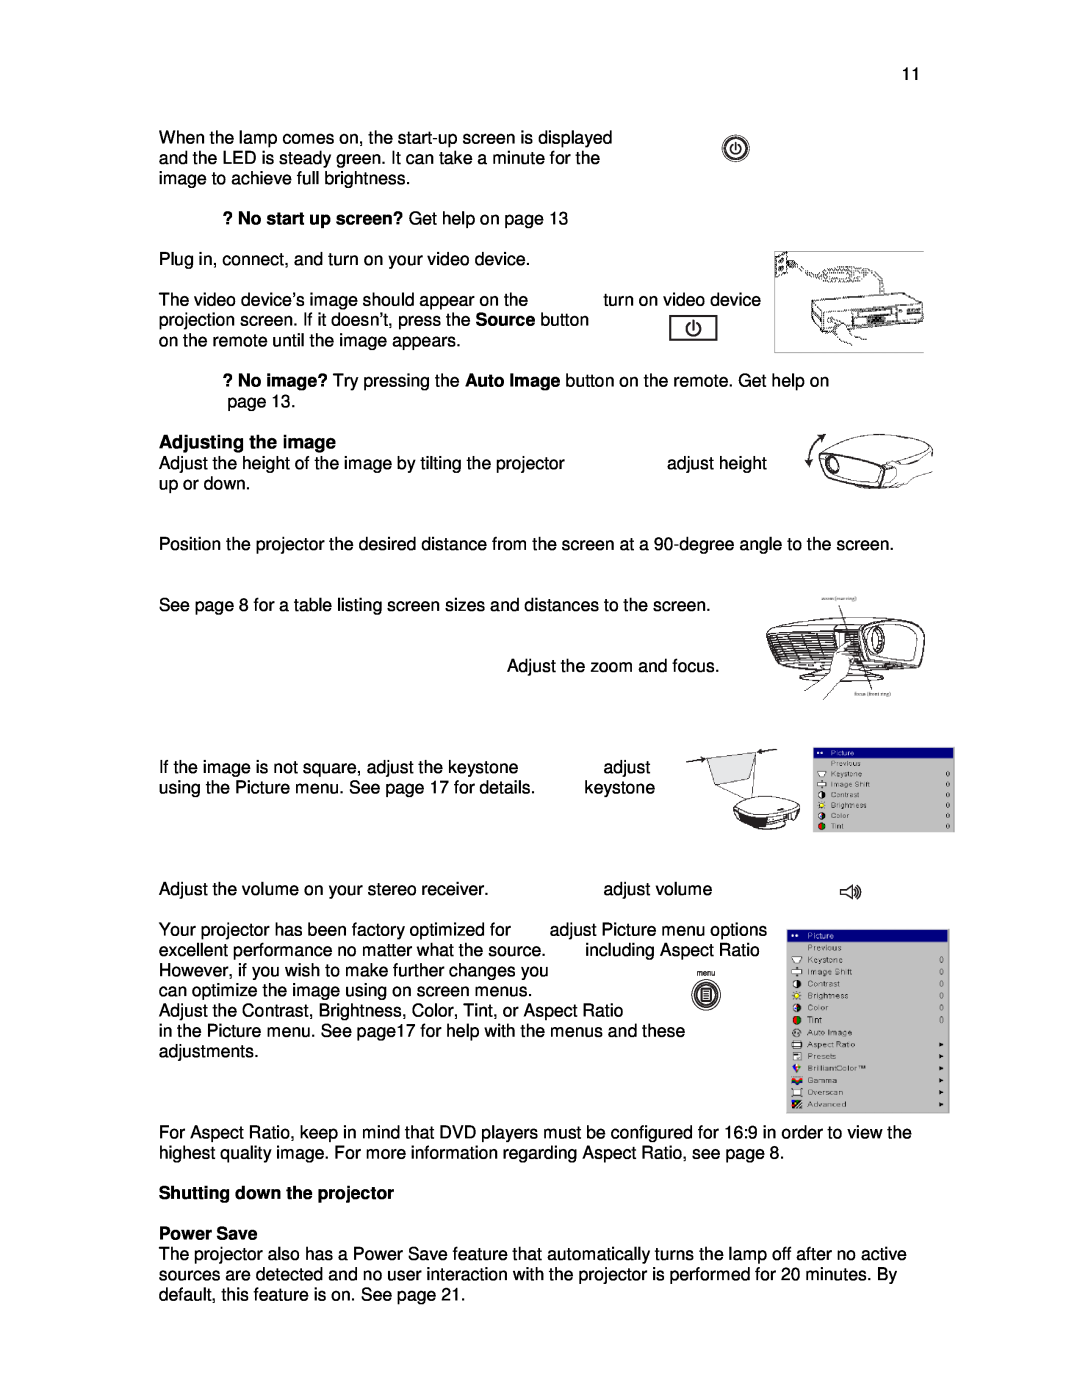 Knoll Systems HDP404 user manual Adjusting the image, Shutting down the projector Power Save 